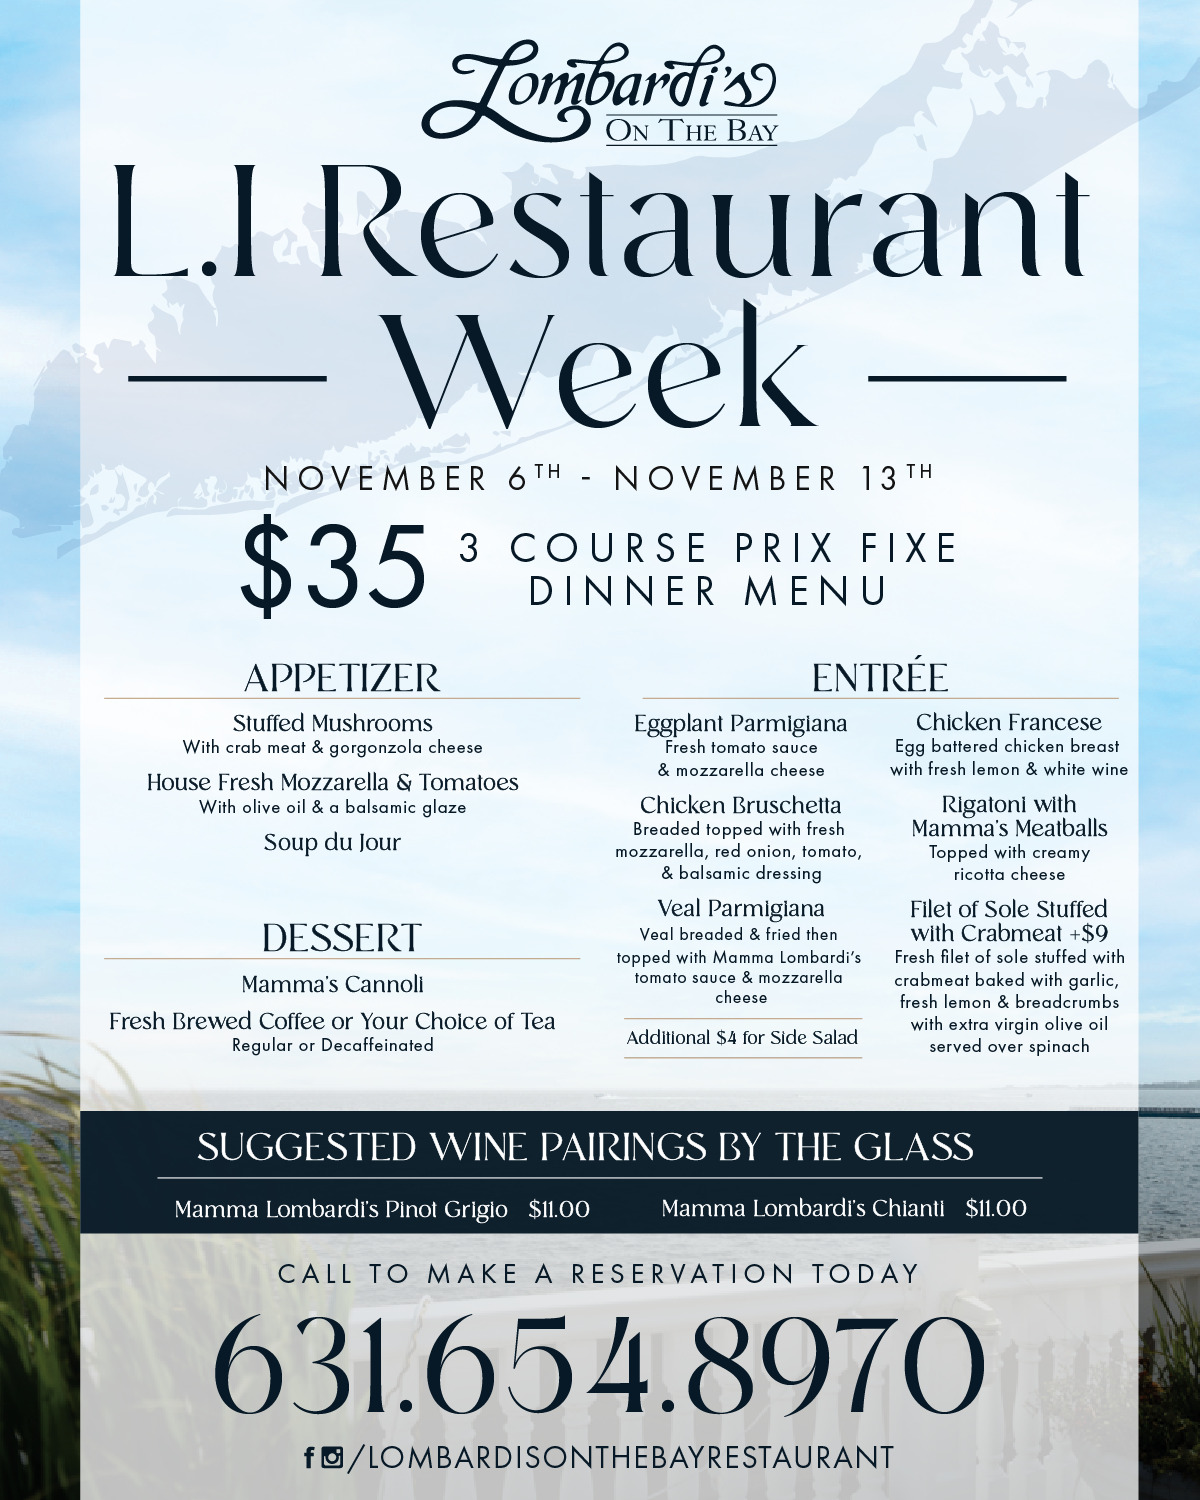 Join us for Long Island Restaurant Week from November 6th through 13th for a special 3-course prix fixe dinner menu for $35 per person! Call now to make your reservations at 631-654-8970.